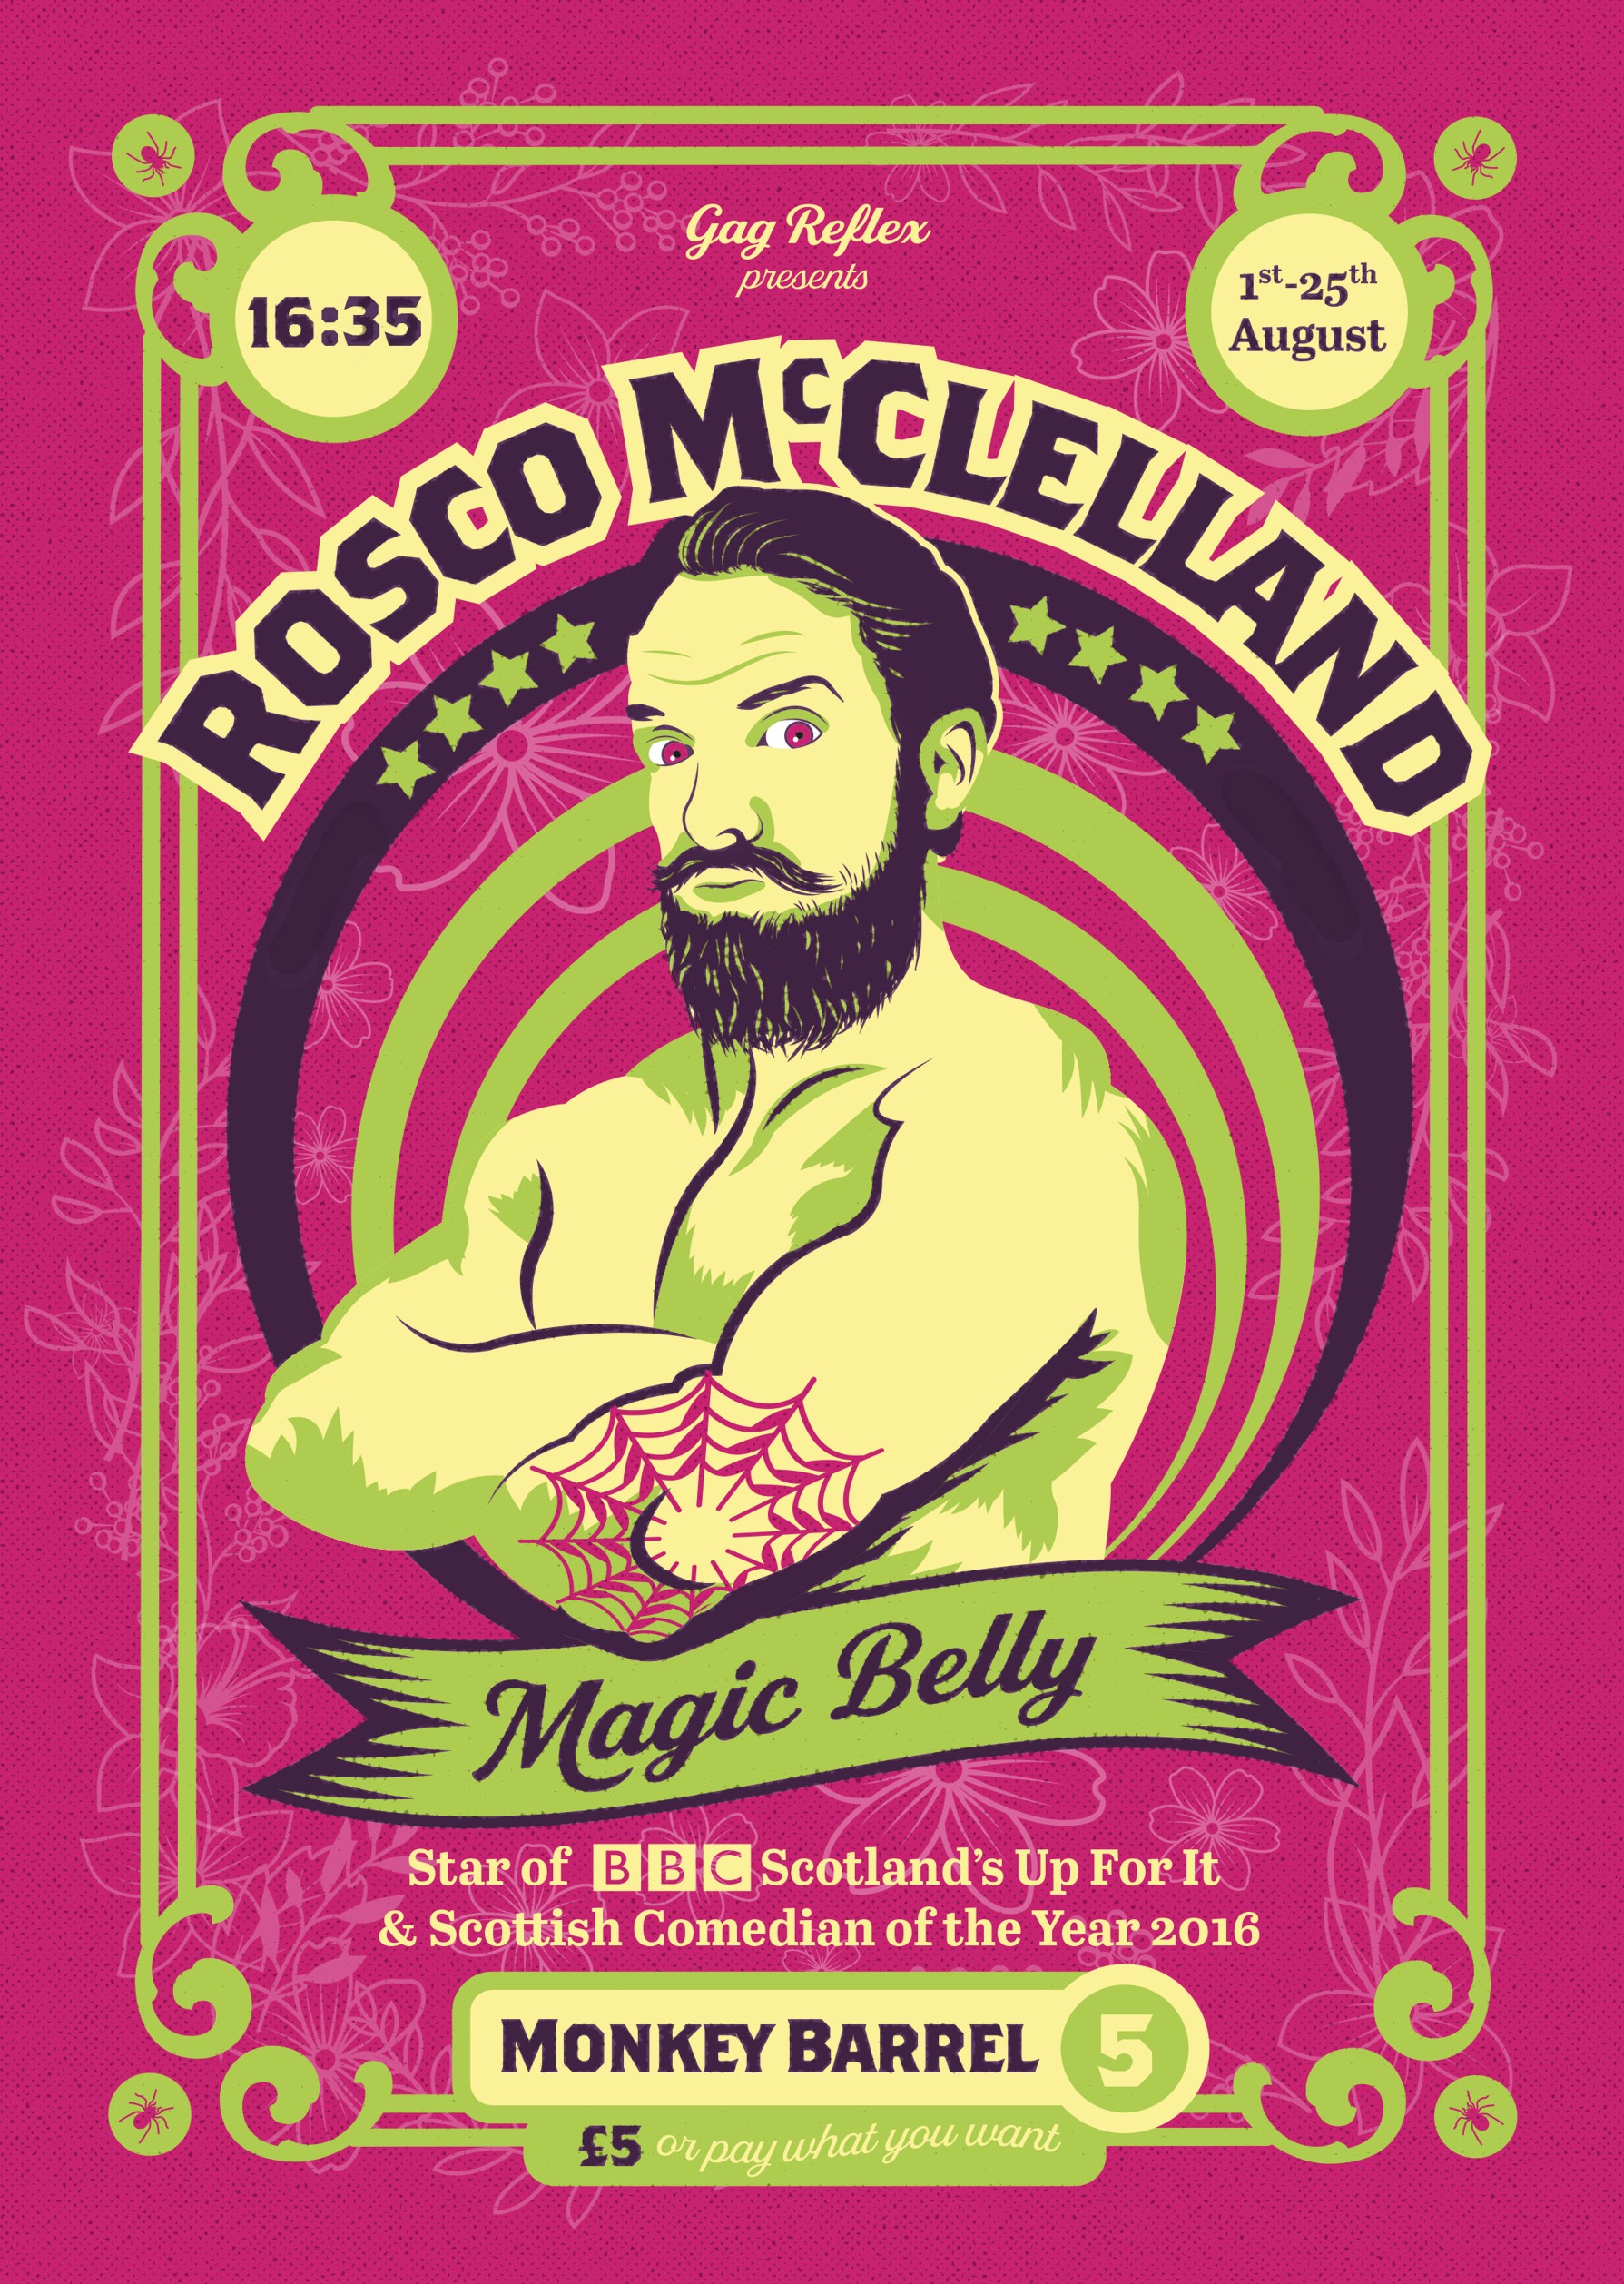 The poster for Rosco McClelland - Magic Belly